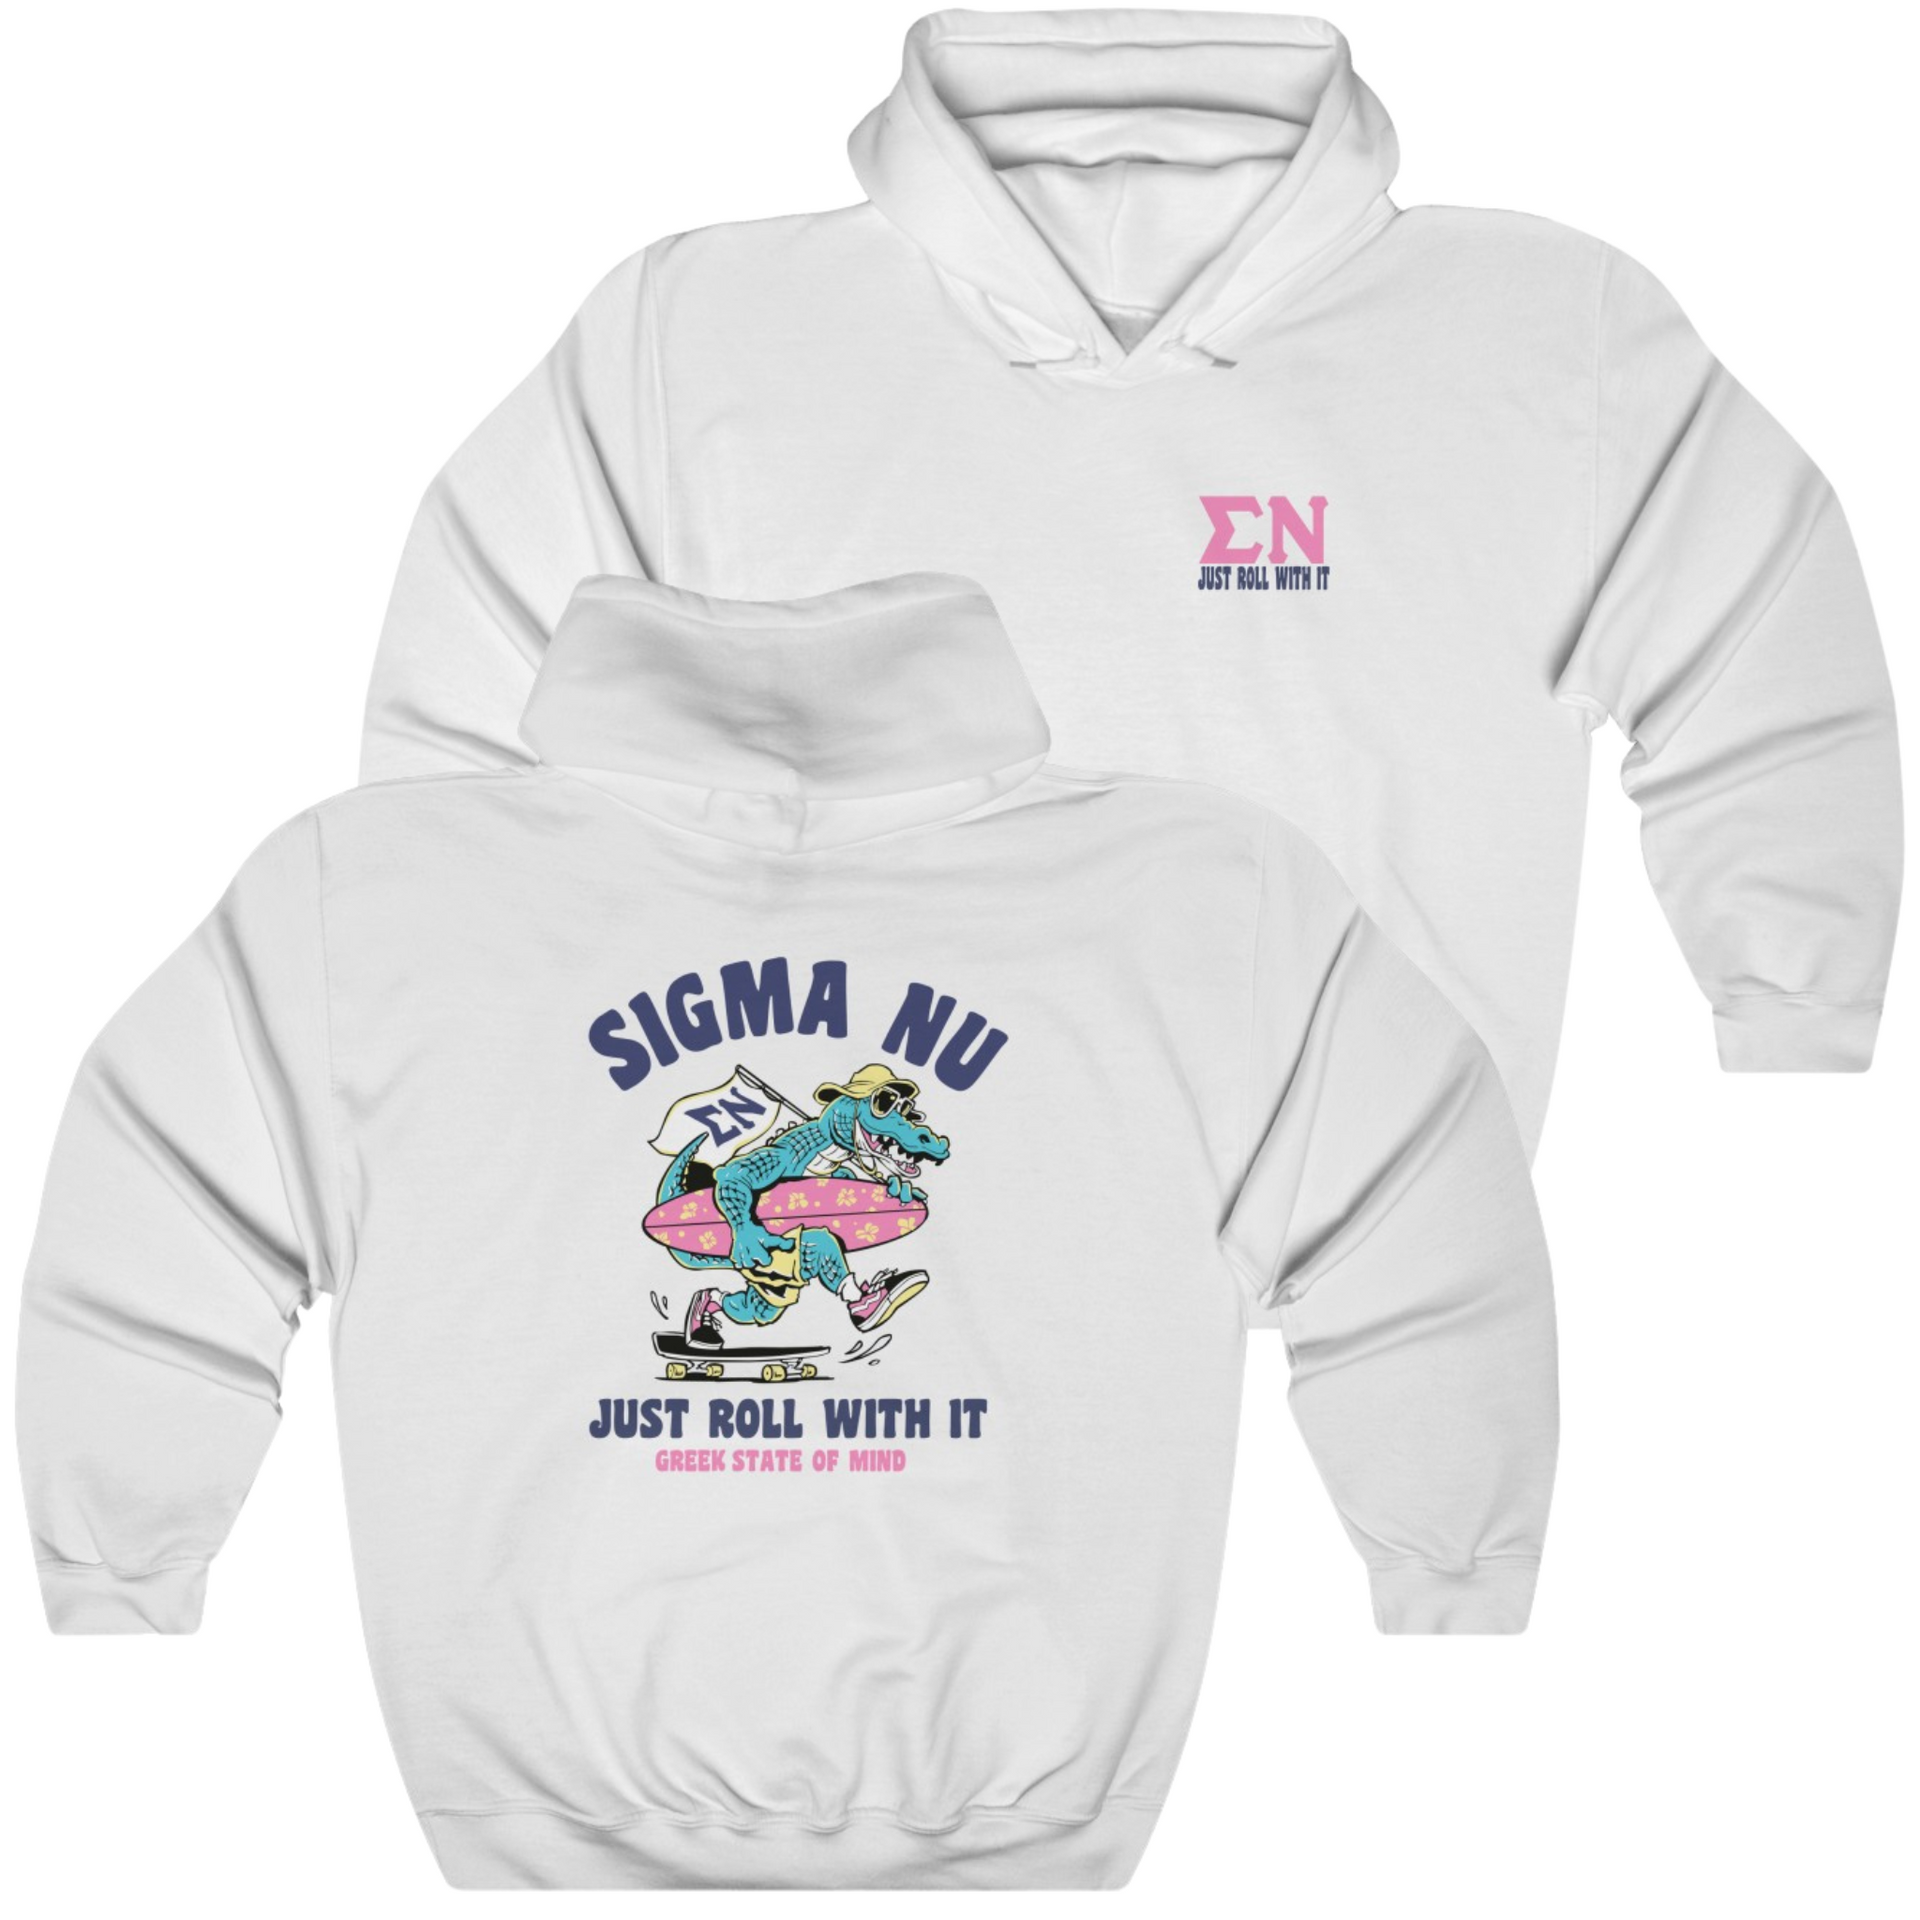 White Sigma Nu Graphic Hoodie | Alligator Skater | Sigma Nu Clothing, Apparel and Merchandise